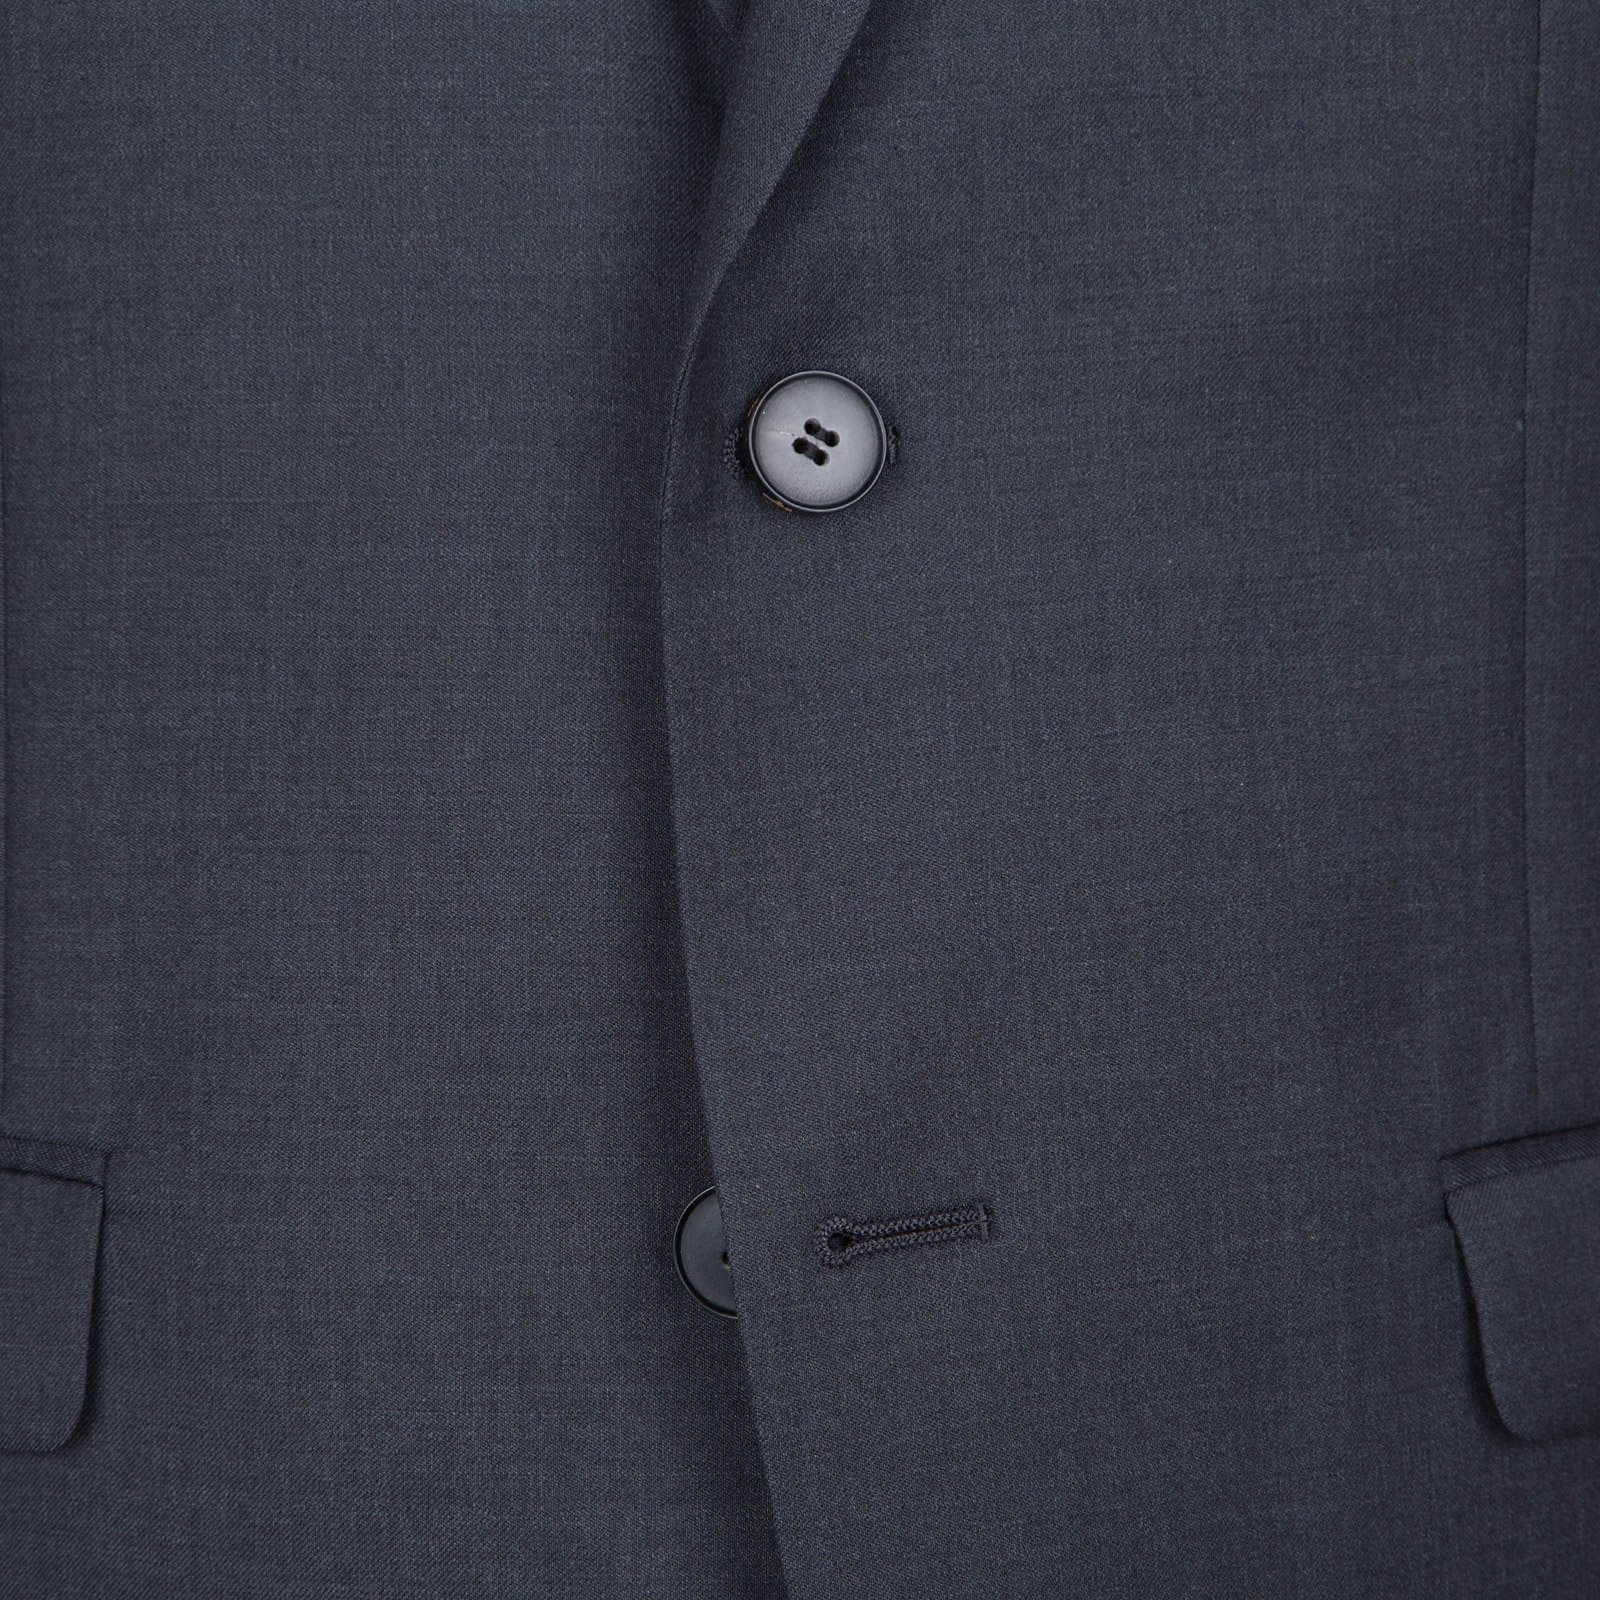 Anchor Charcoal Wool Suit Jacket - Jackets-Dress Jackets : Fifth Avenue ...